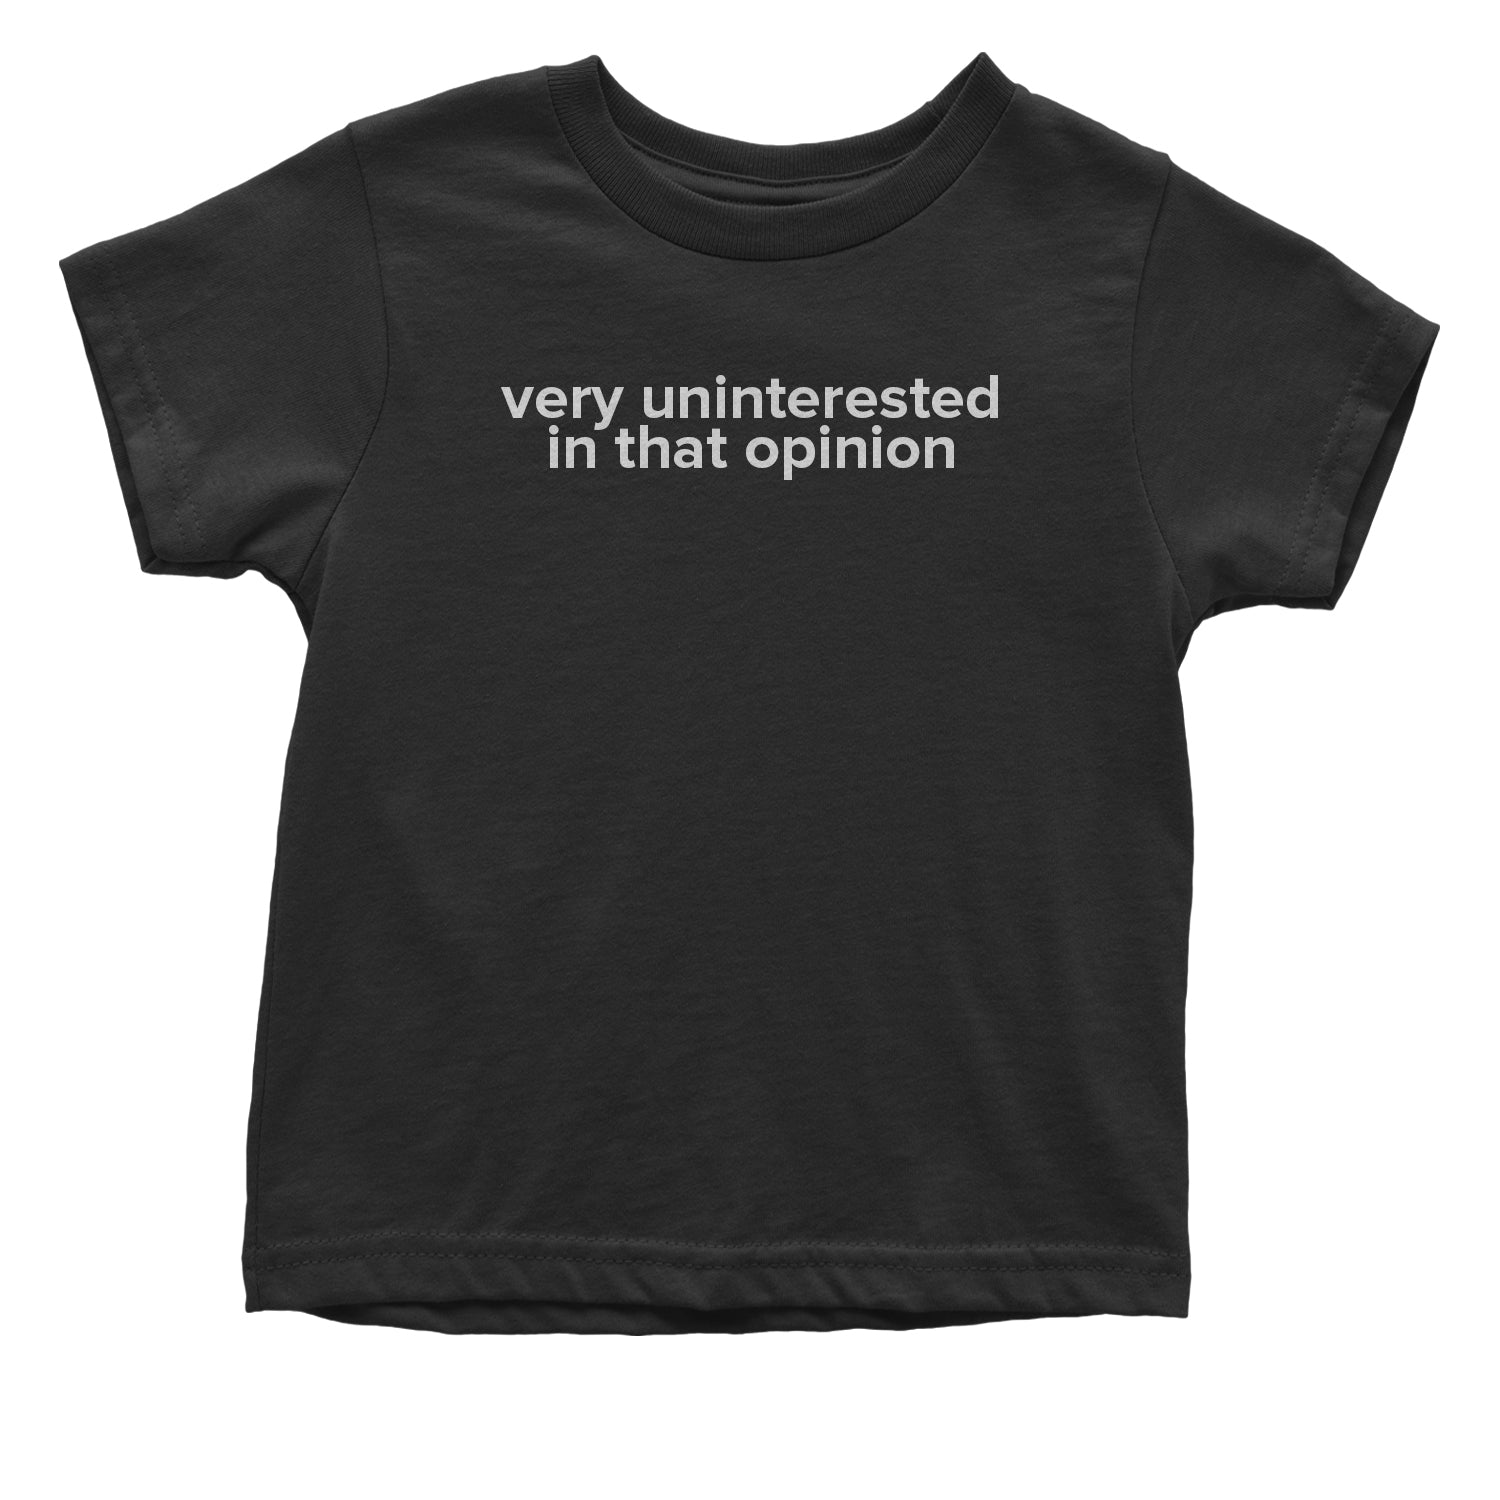 Very Uninterested In That Opinion Toddler T-Shirt alexis, creek, d, schitt, schitts by Expression Tees